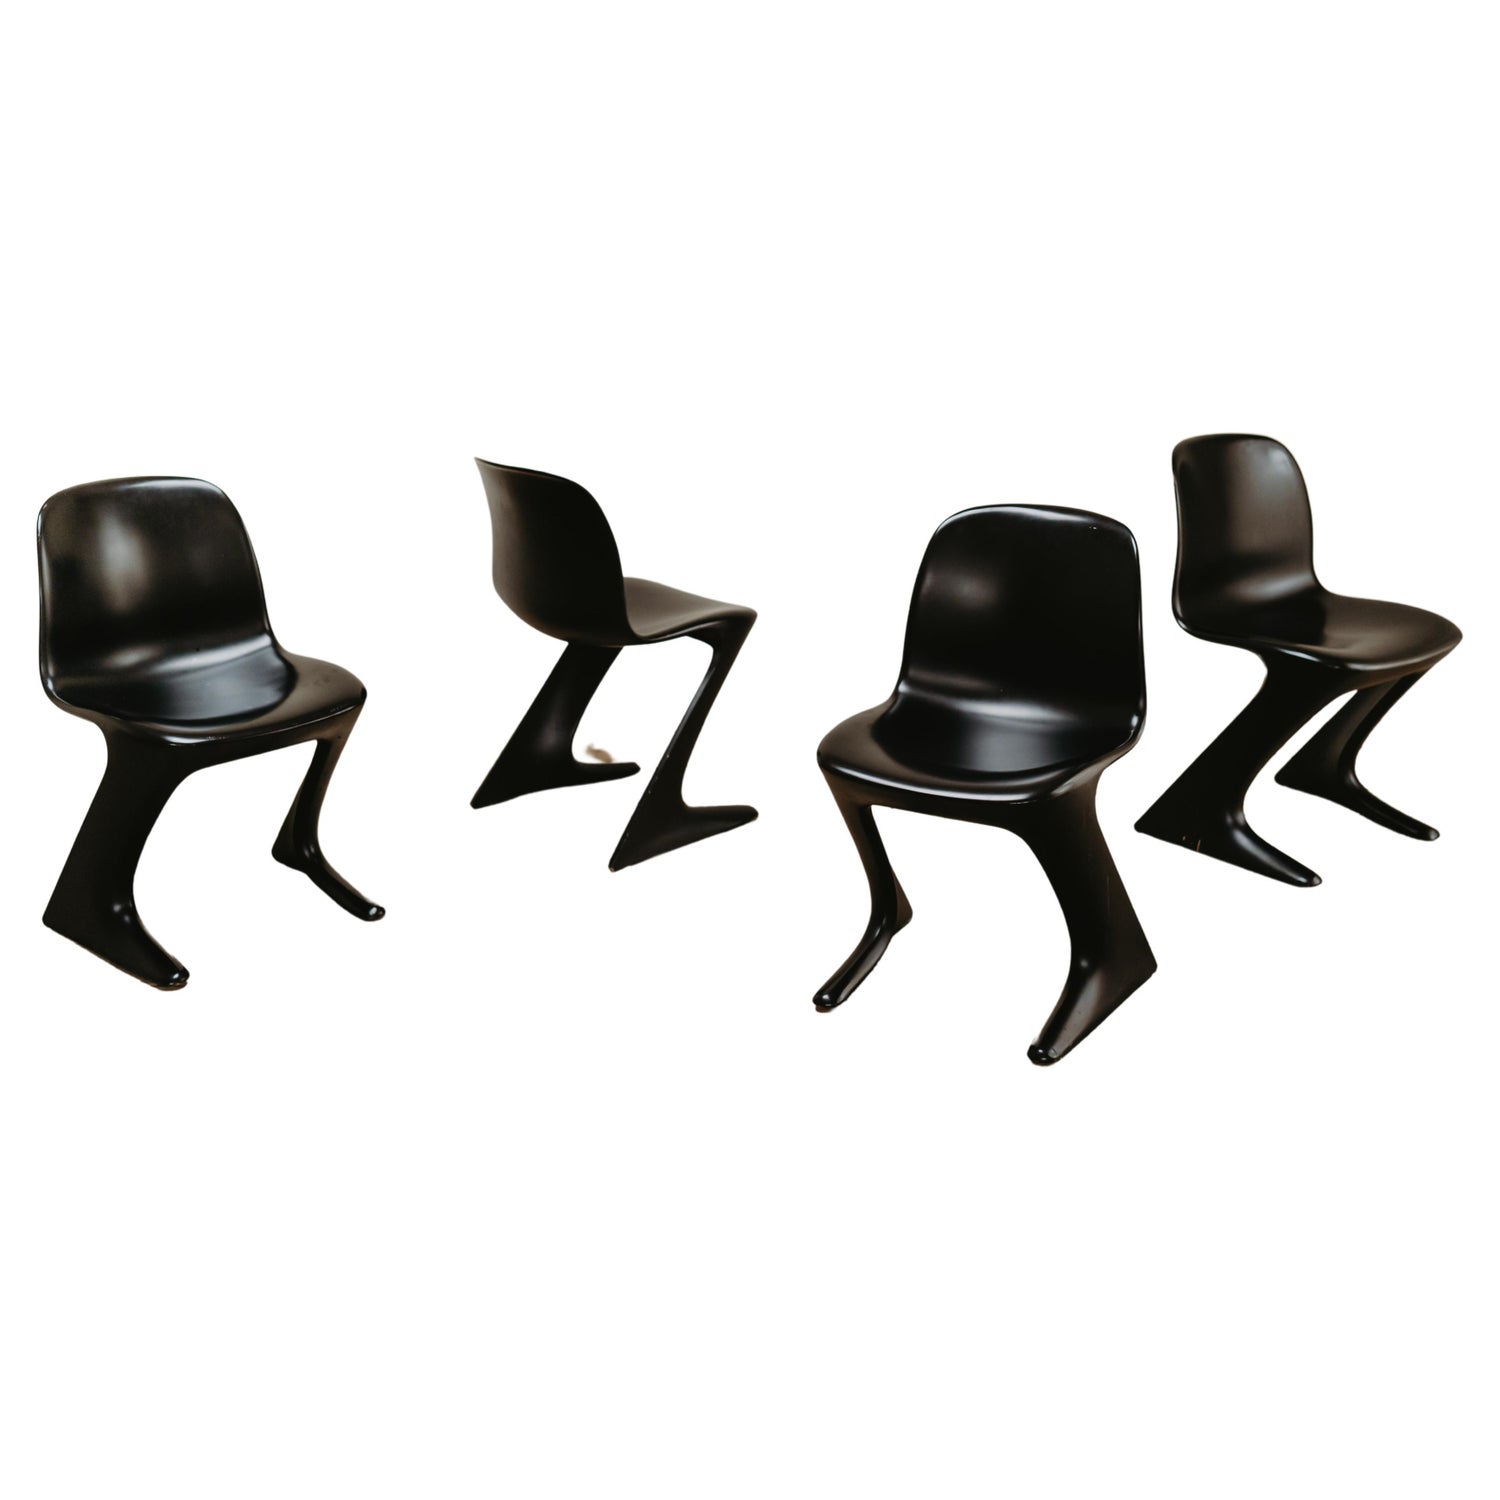 Set of 4 Cognac Leather and Steel Giotto Stoppino, "Jot" Chairs at 1stDibs